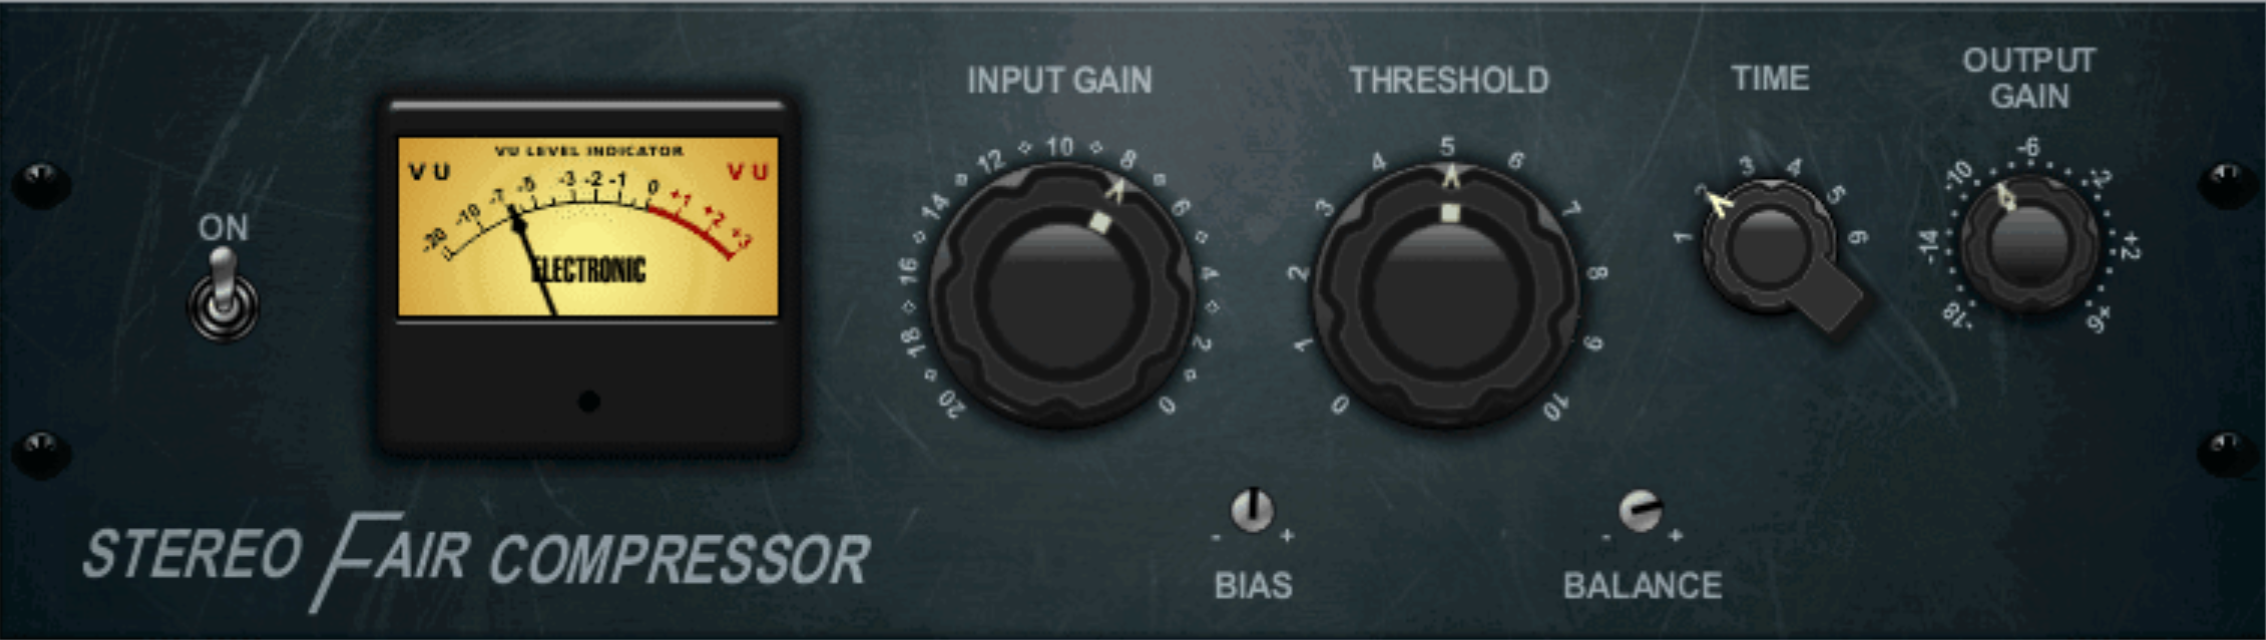 Behringer X32 Effects Tutorial – Stereo Fair Compressor